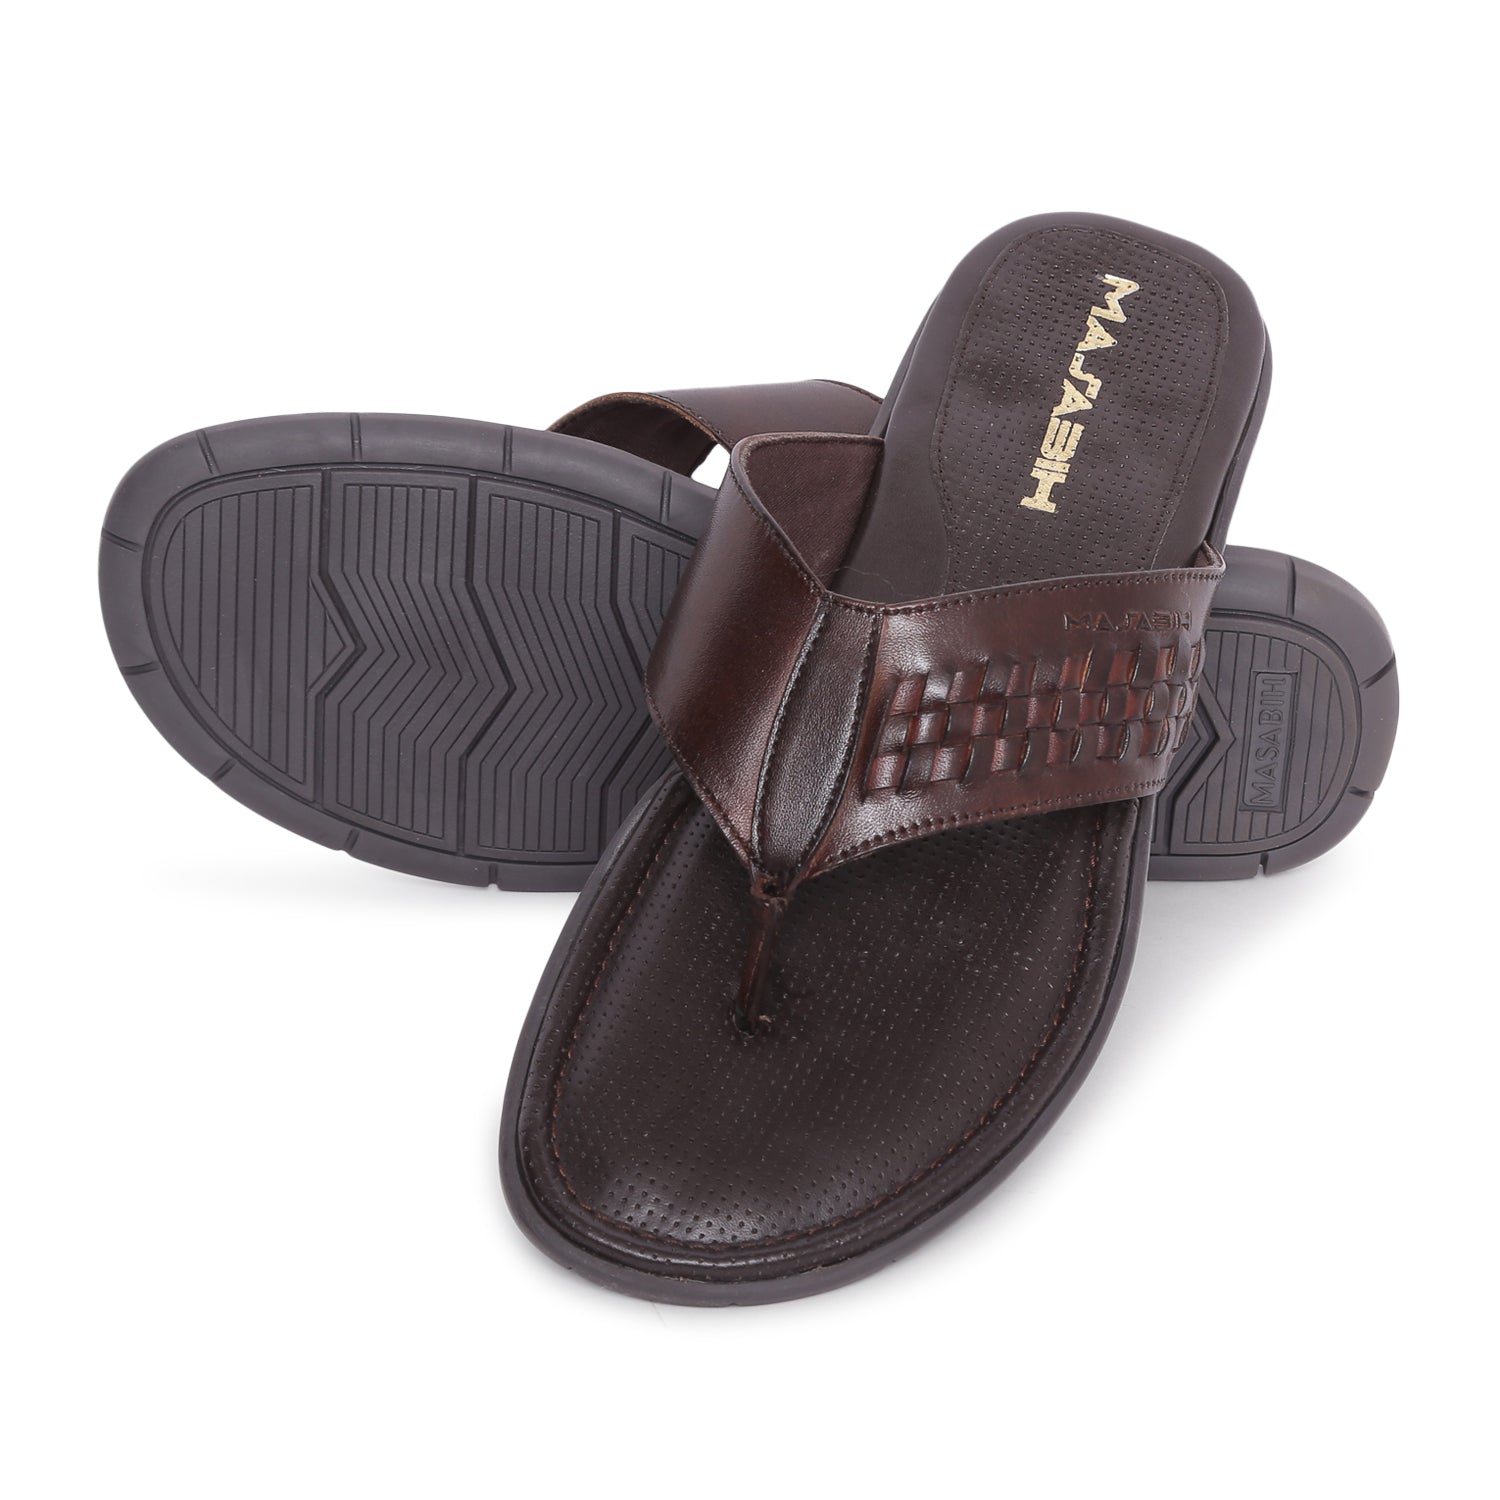 MASABIH Geniune Leather Soft Brown / Tan Color modern lace thong sandals for Mens